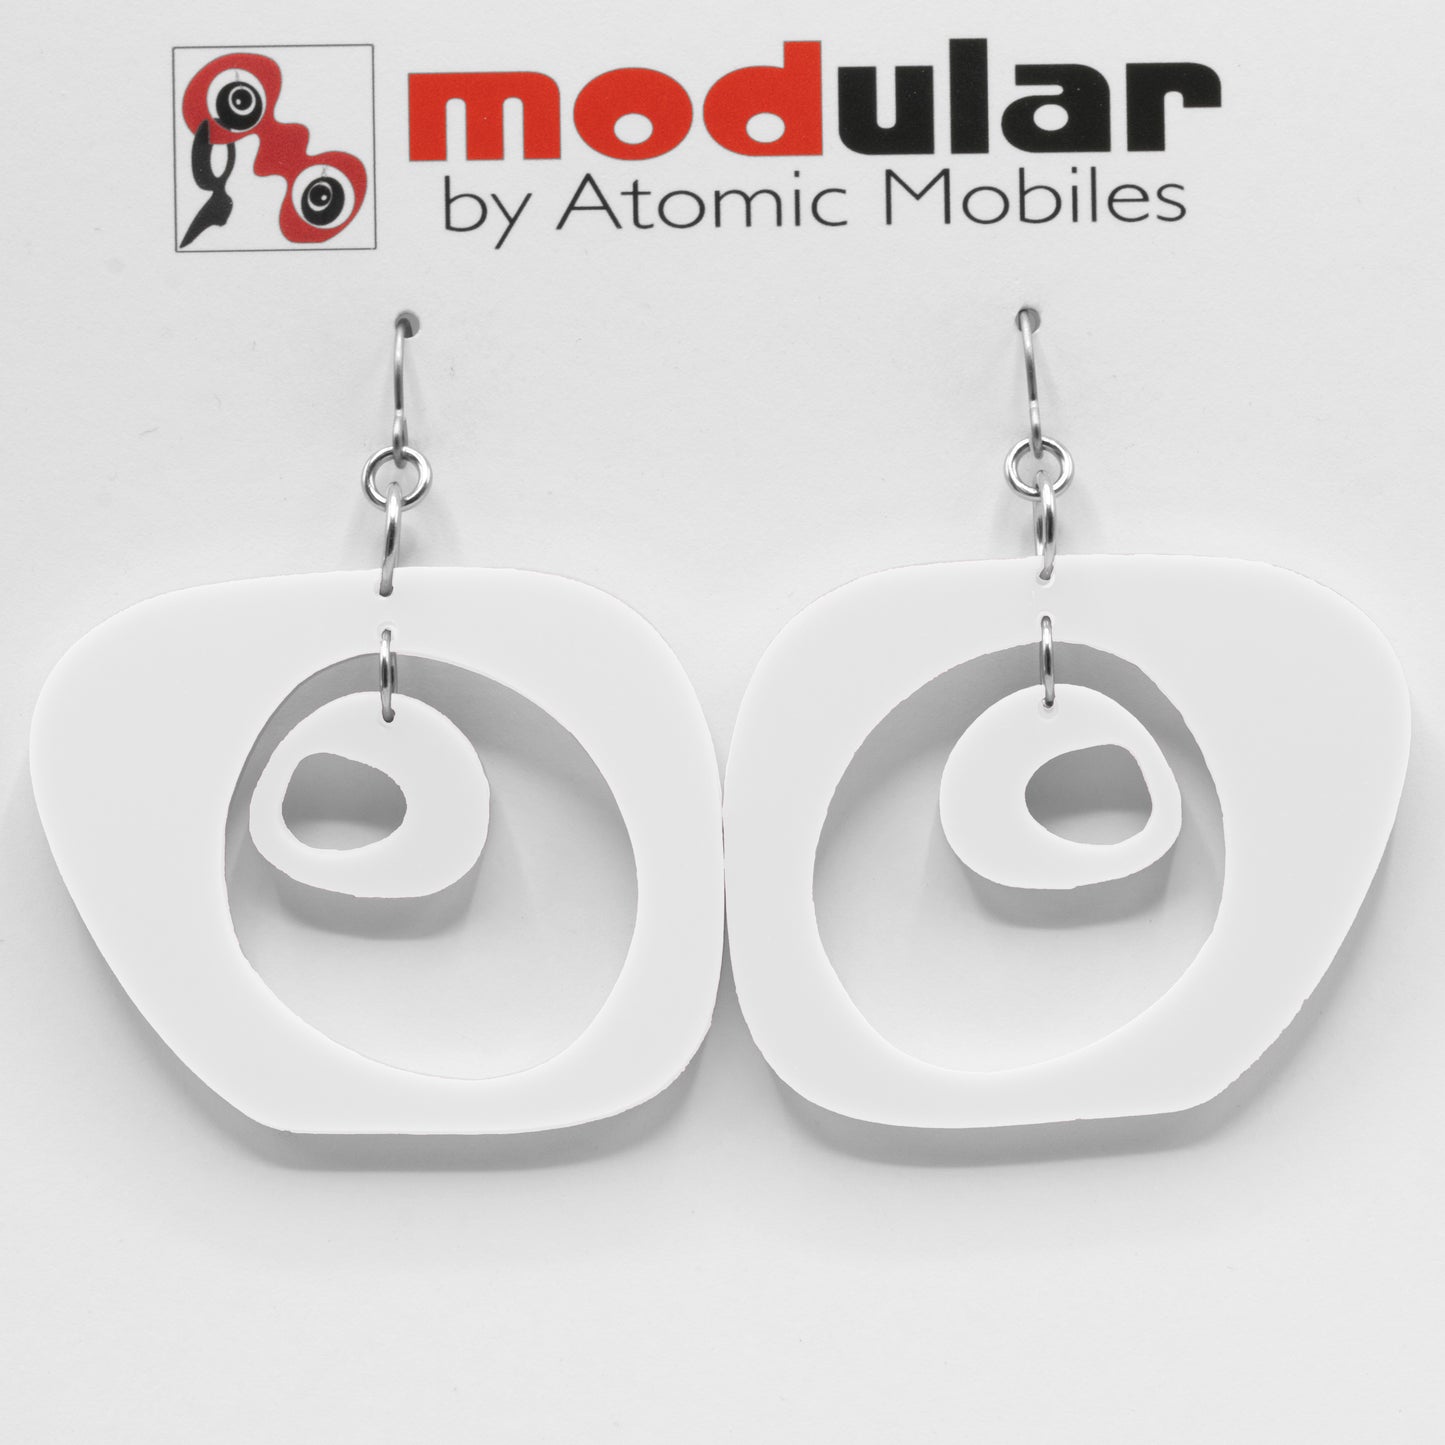 Paris Statement Earrings in White - modern fashion inspired dangle earrings - handmade mod jewelry by AtomicMobiles.com